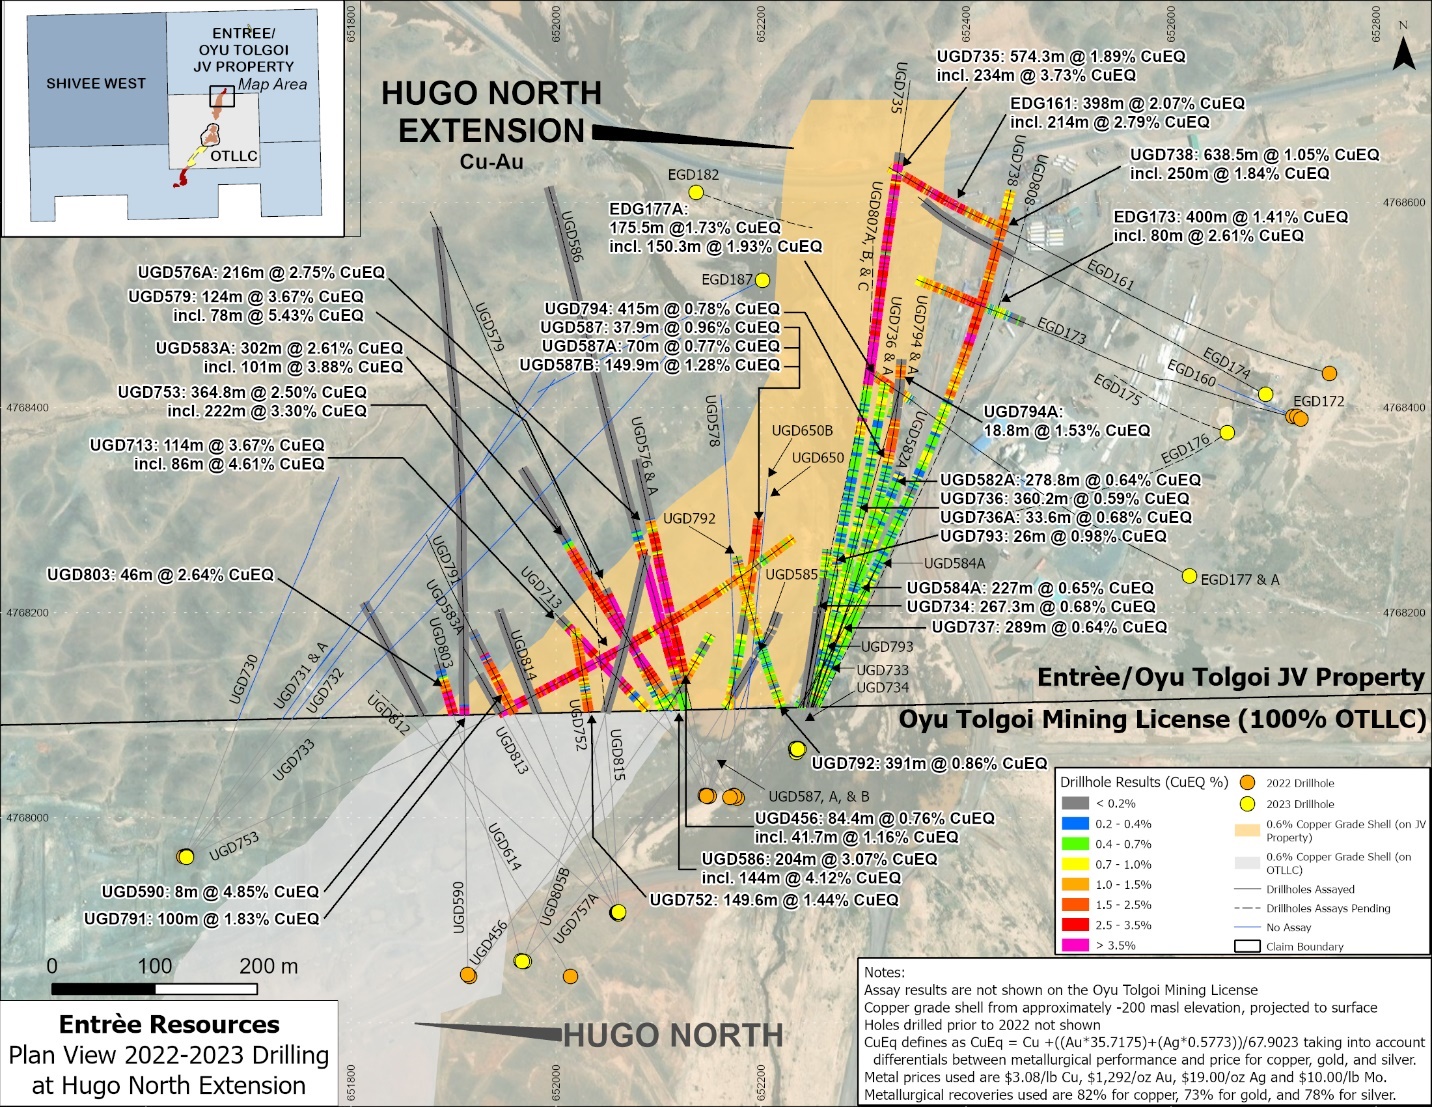 Plan View of 2022 and 2023 Drilling at the HNE Deposit